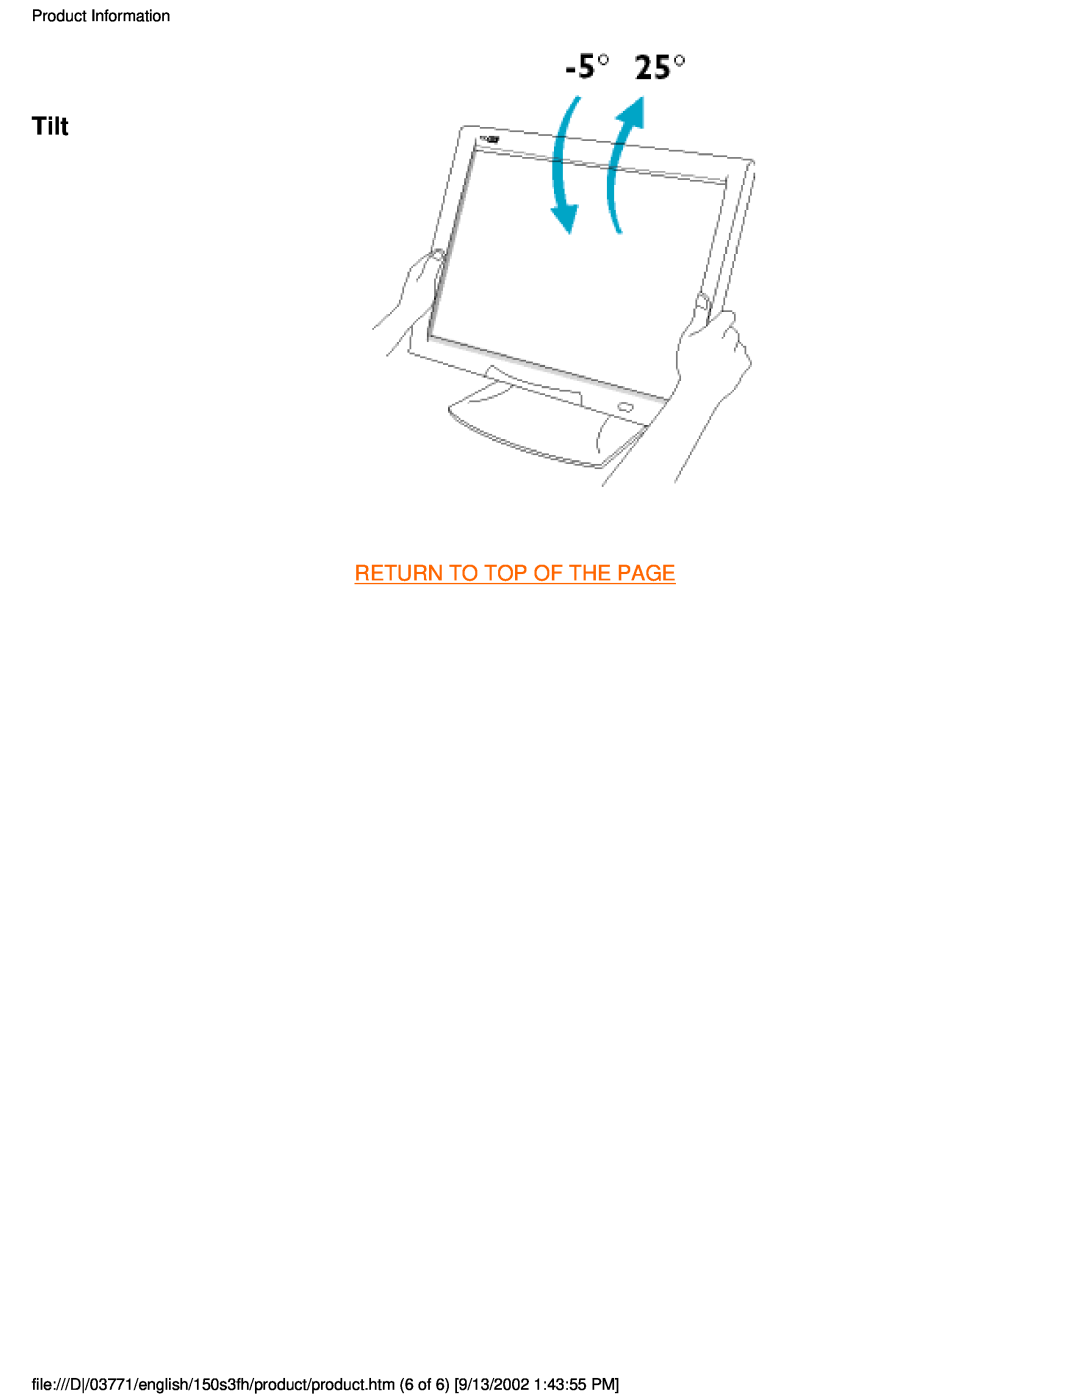 Philips 150S3H user manual Tilt, Return To Top Of The Page, Product Information 